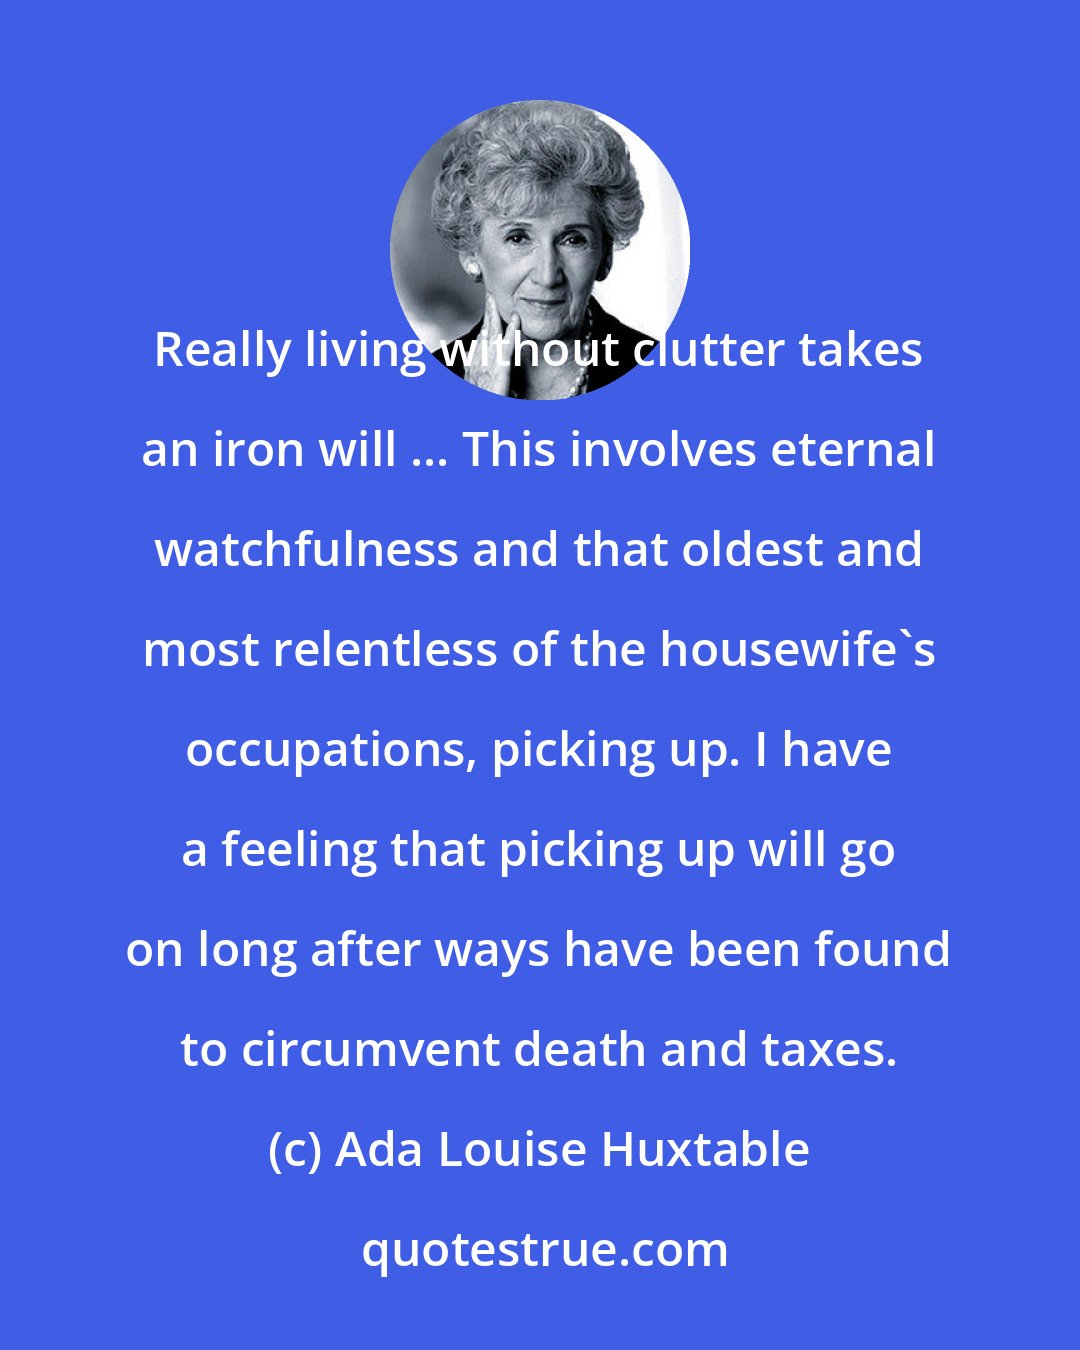 Ada Louise Huxtable: Really living without clutter takes an iron will ... This involves eternal watchfulness and that oldest and most relentless of the housewife's occupations, picking up. I have a feeling that picking up will go on long after ways have been found to circumvent death and taxes.